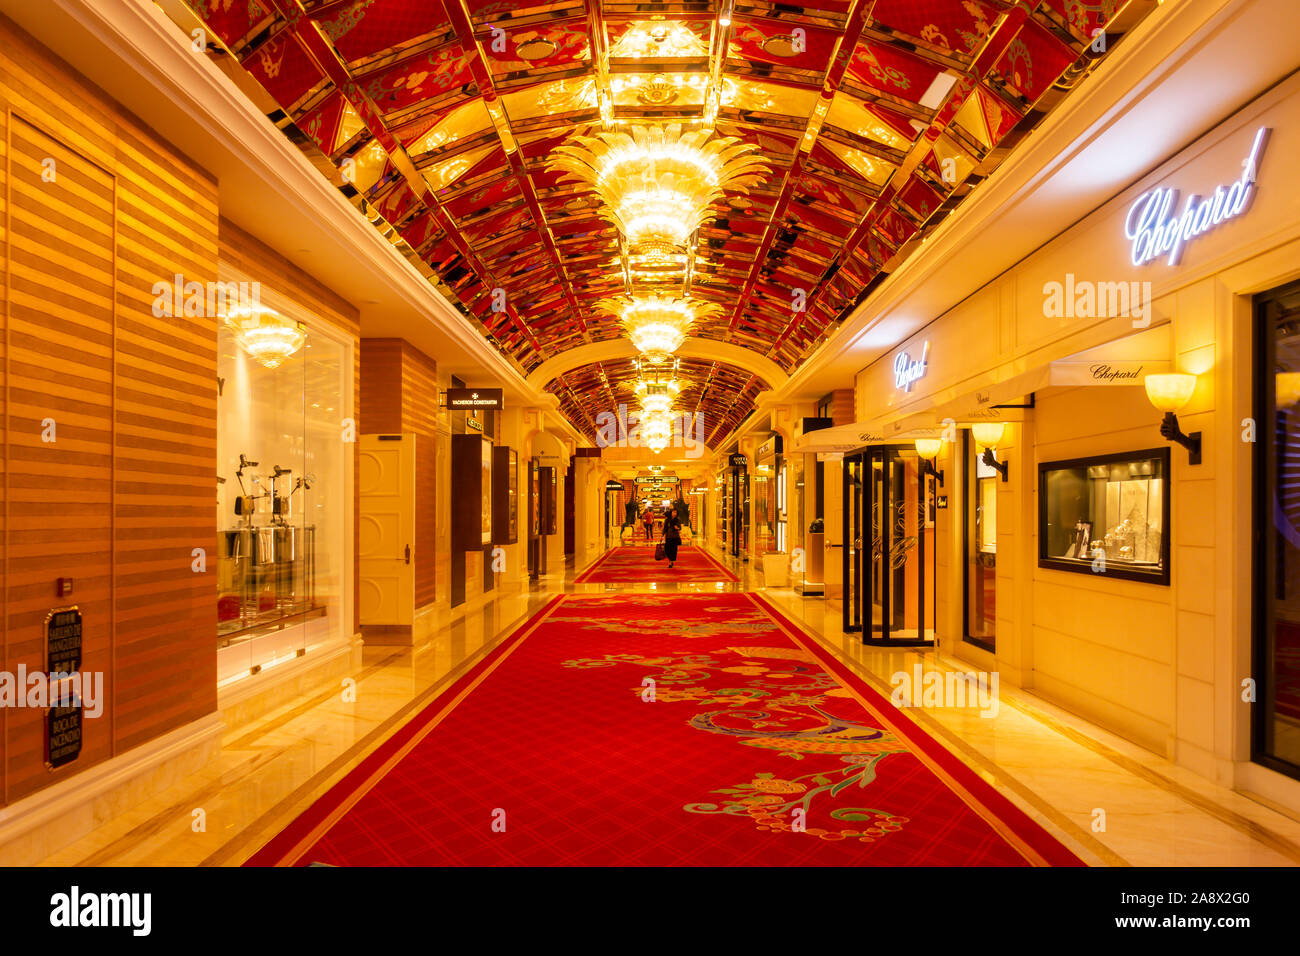 October 31, 2019: MACAU, CHINA - Interior of the Wynn Palace, a Large Upscale Casino and Hotel with a Number of Luxury Brands Stock Photo